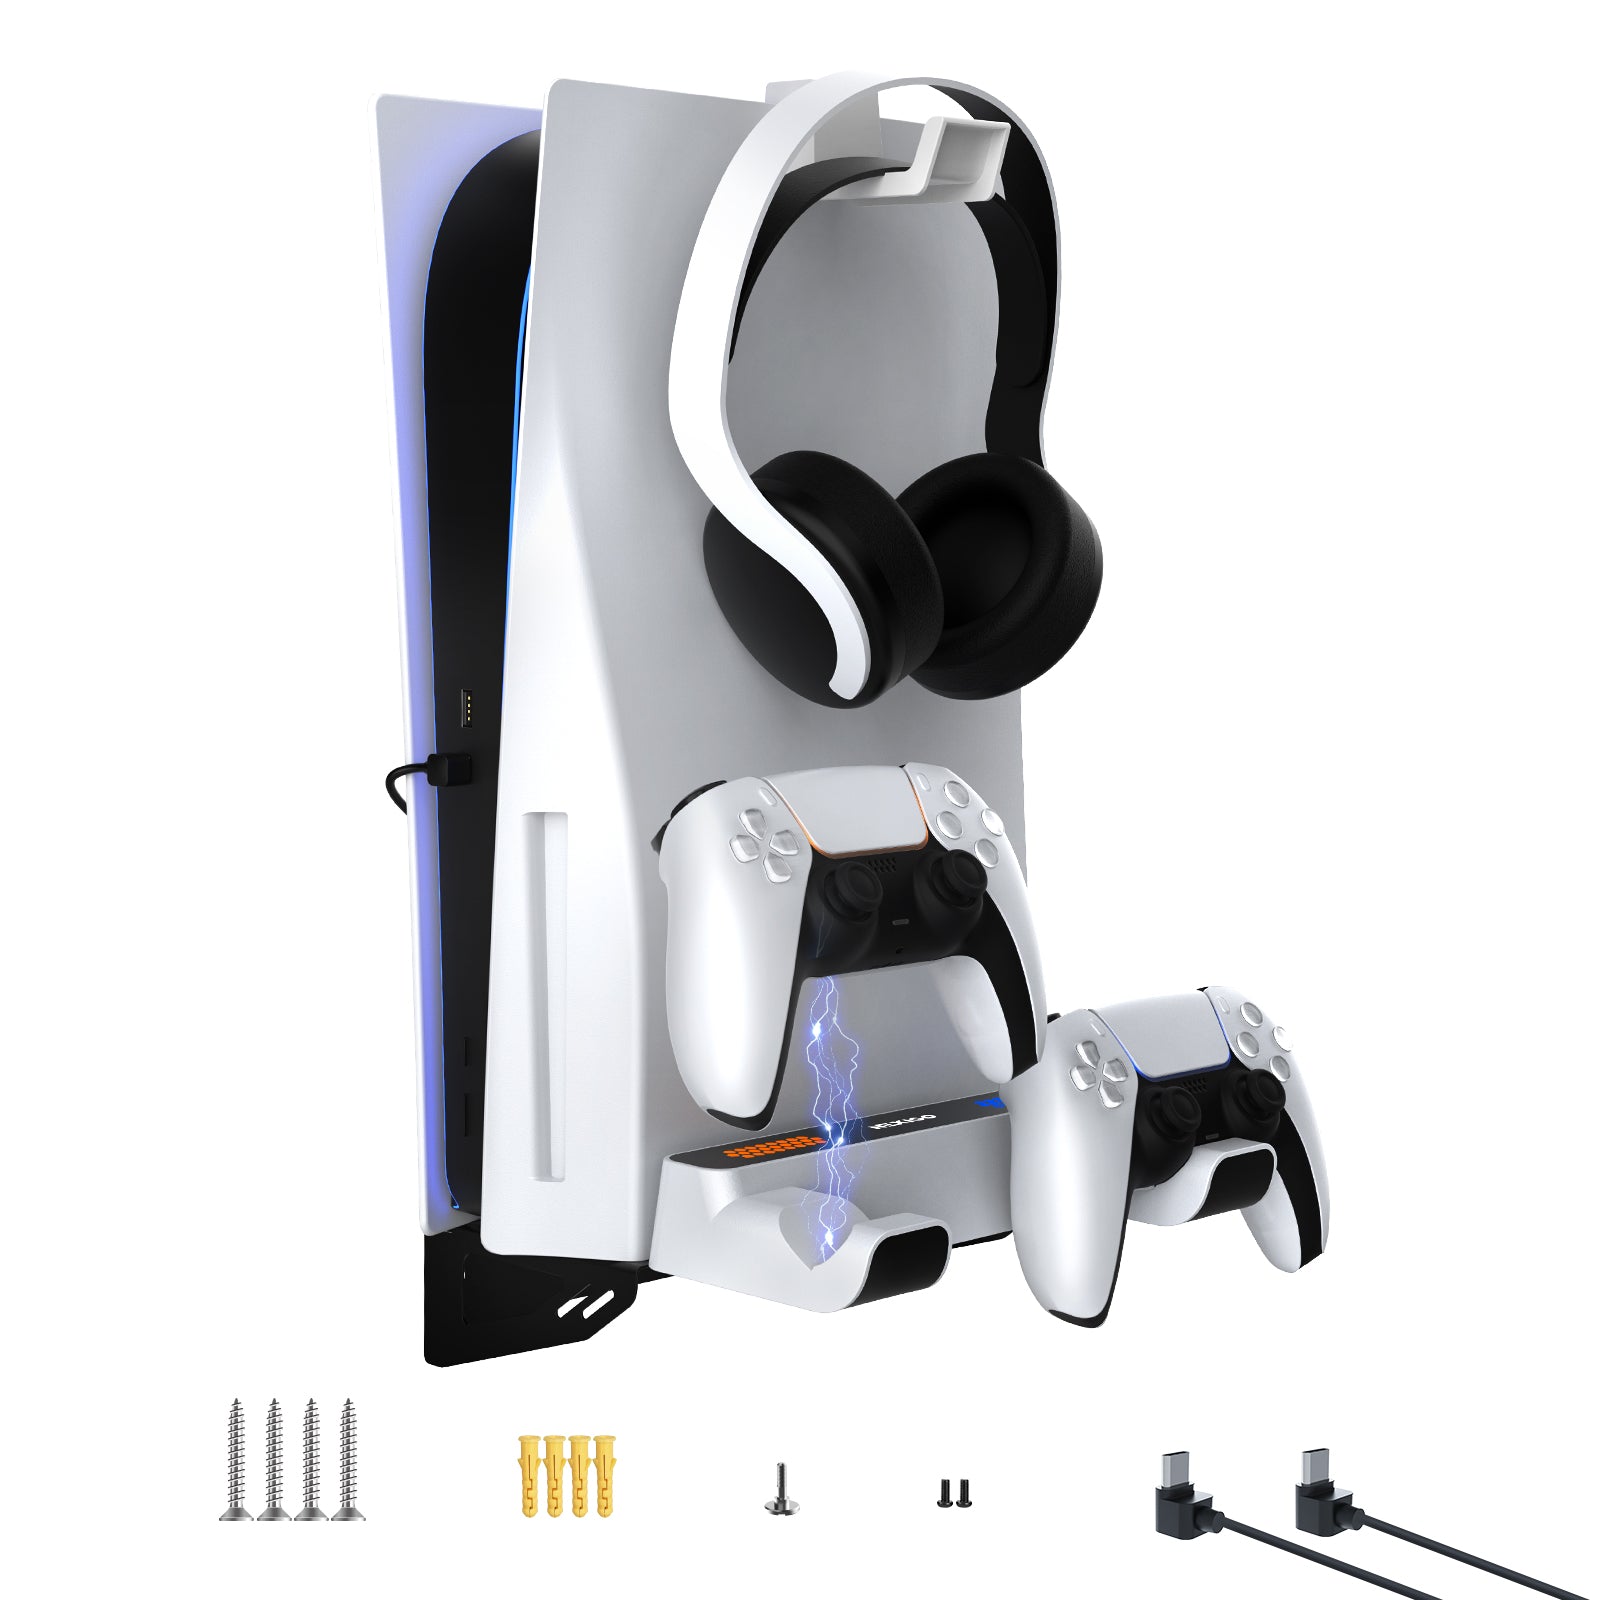 NexiGo PS5 Wall Mount Kit with Charging Station